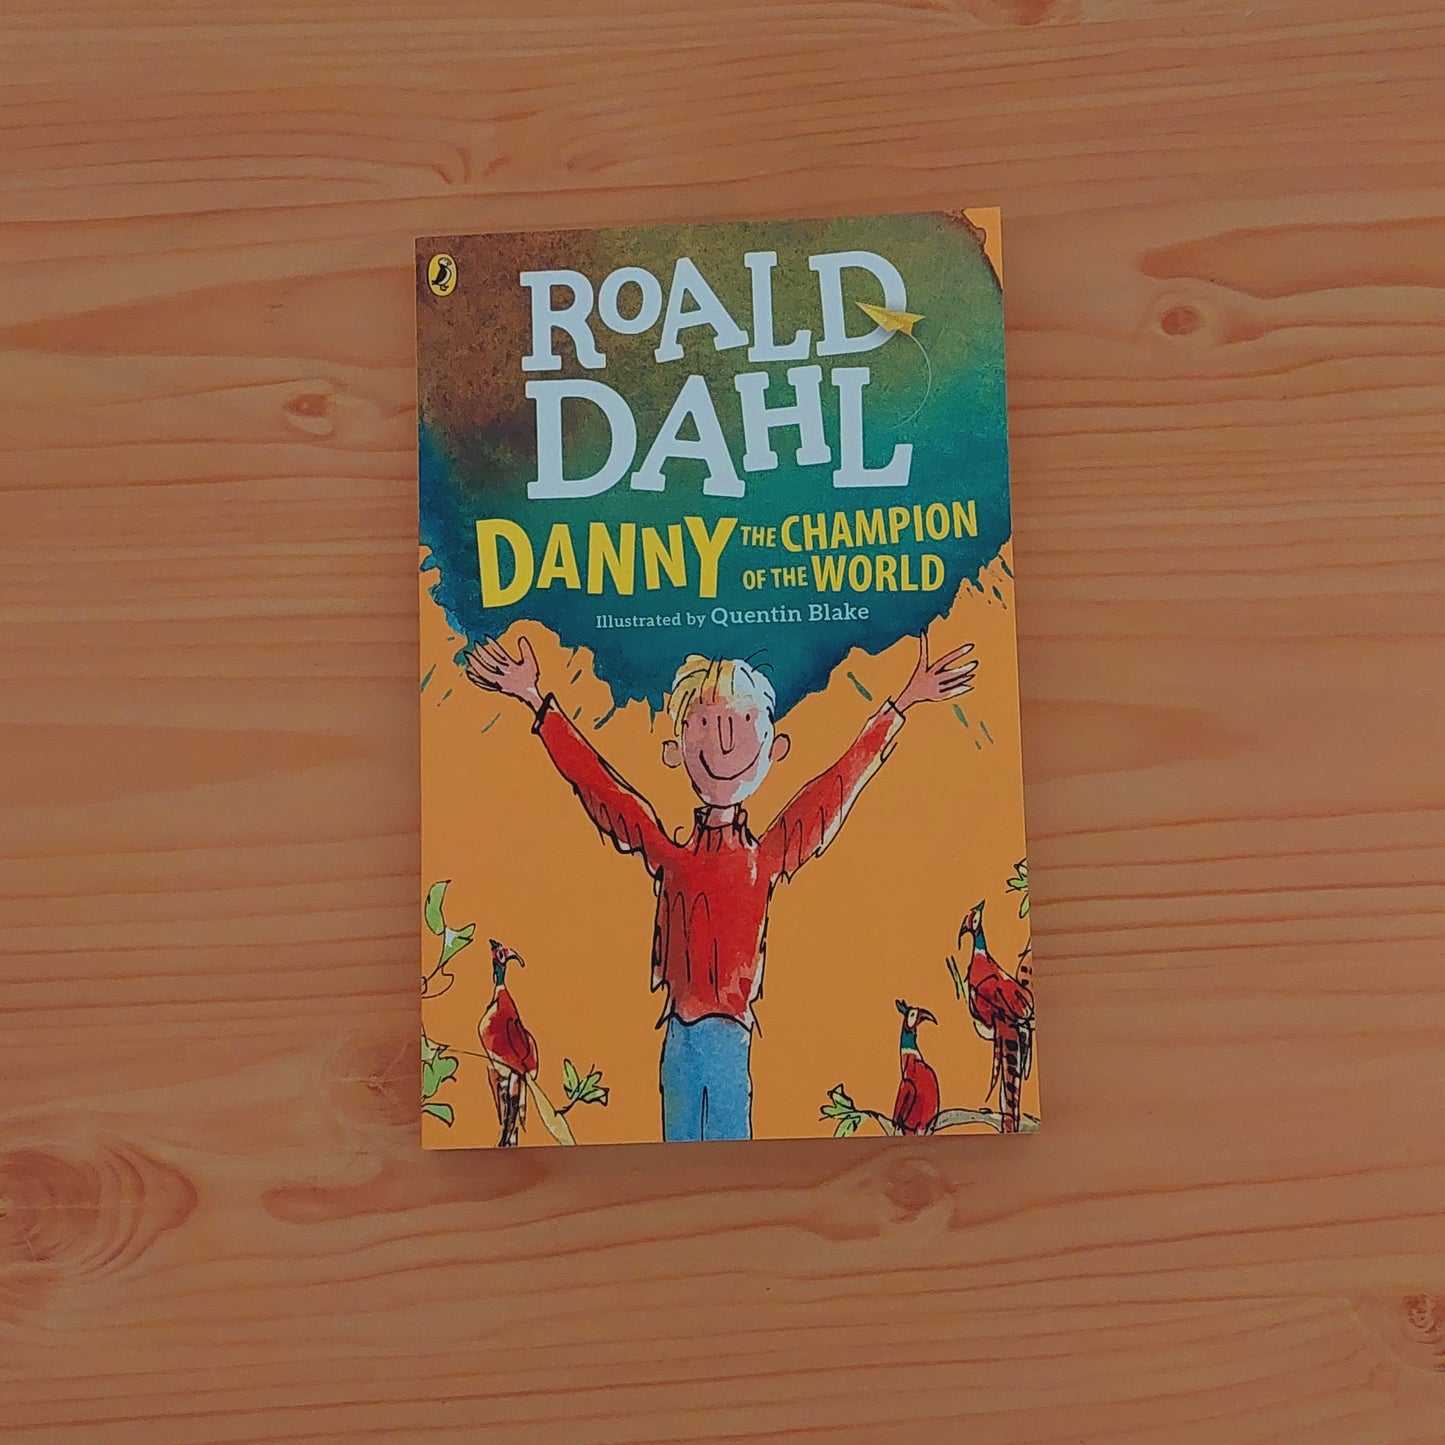 Danny and the Champion of the World by Roald Dahl